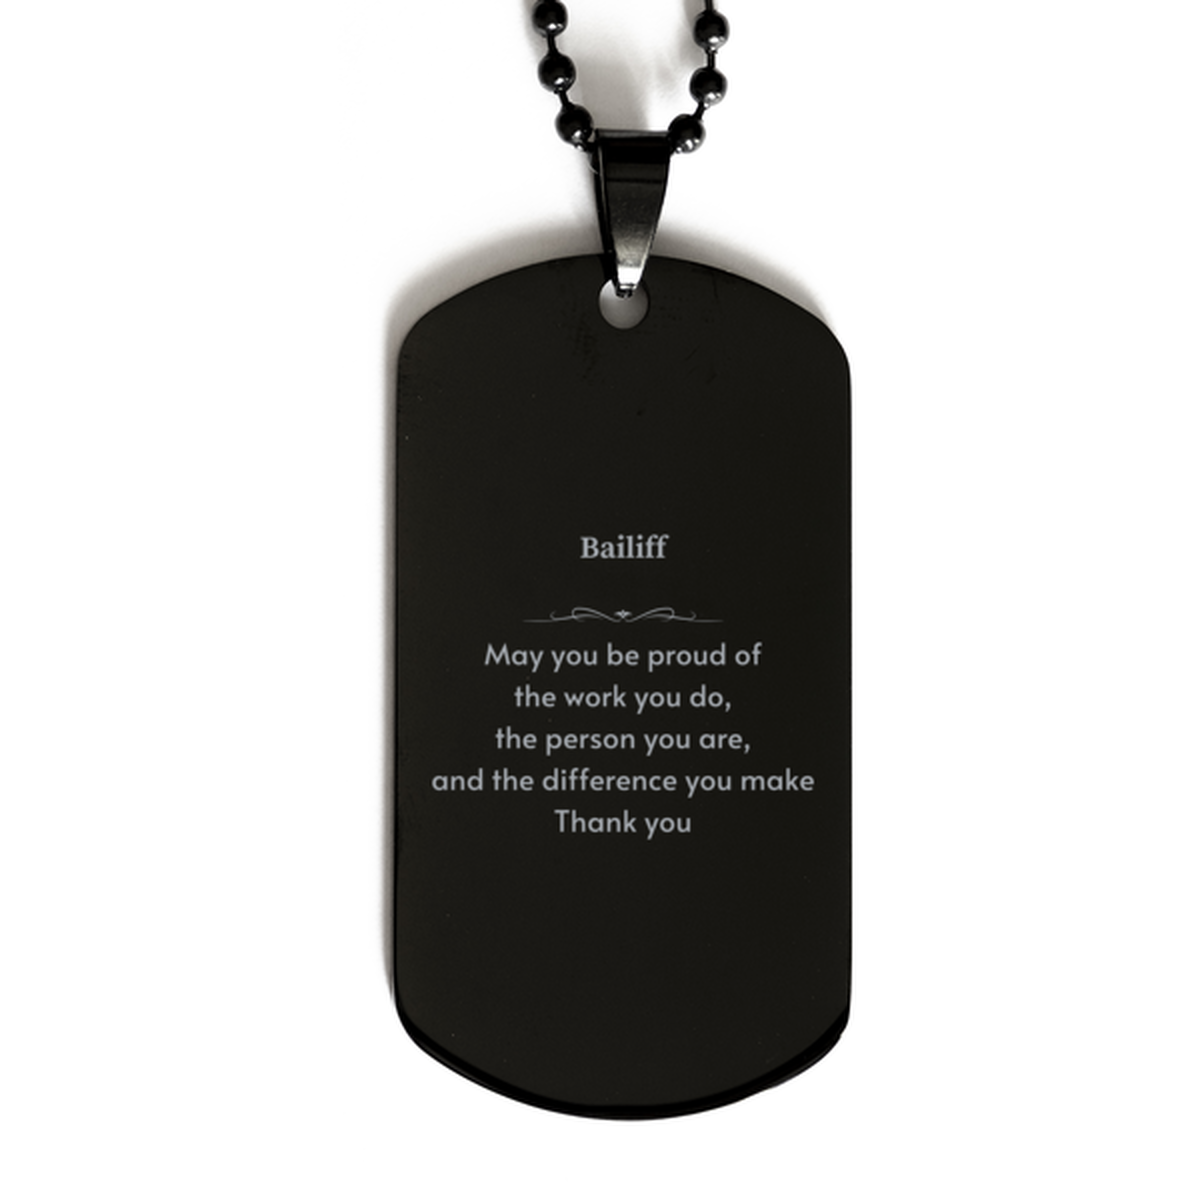 Heartwarming Black Dog Tag Retirement Coworkers Gifts for Bailiff, Bailiff May You be proud of the work you do, the person you are Gifts for Boss Men Women Friends